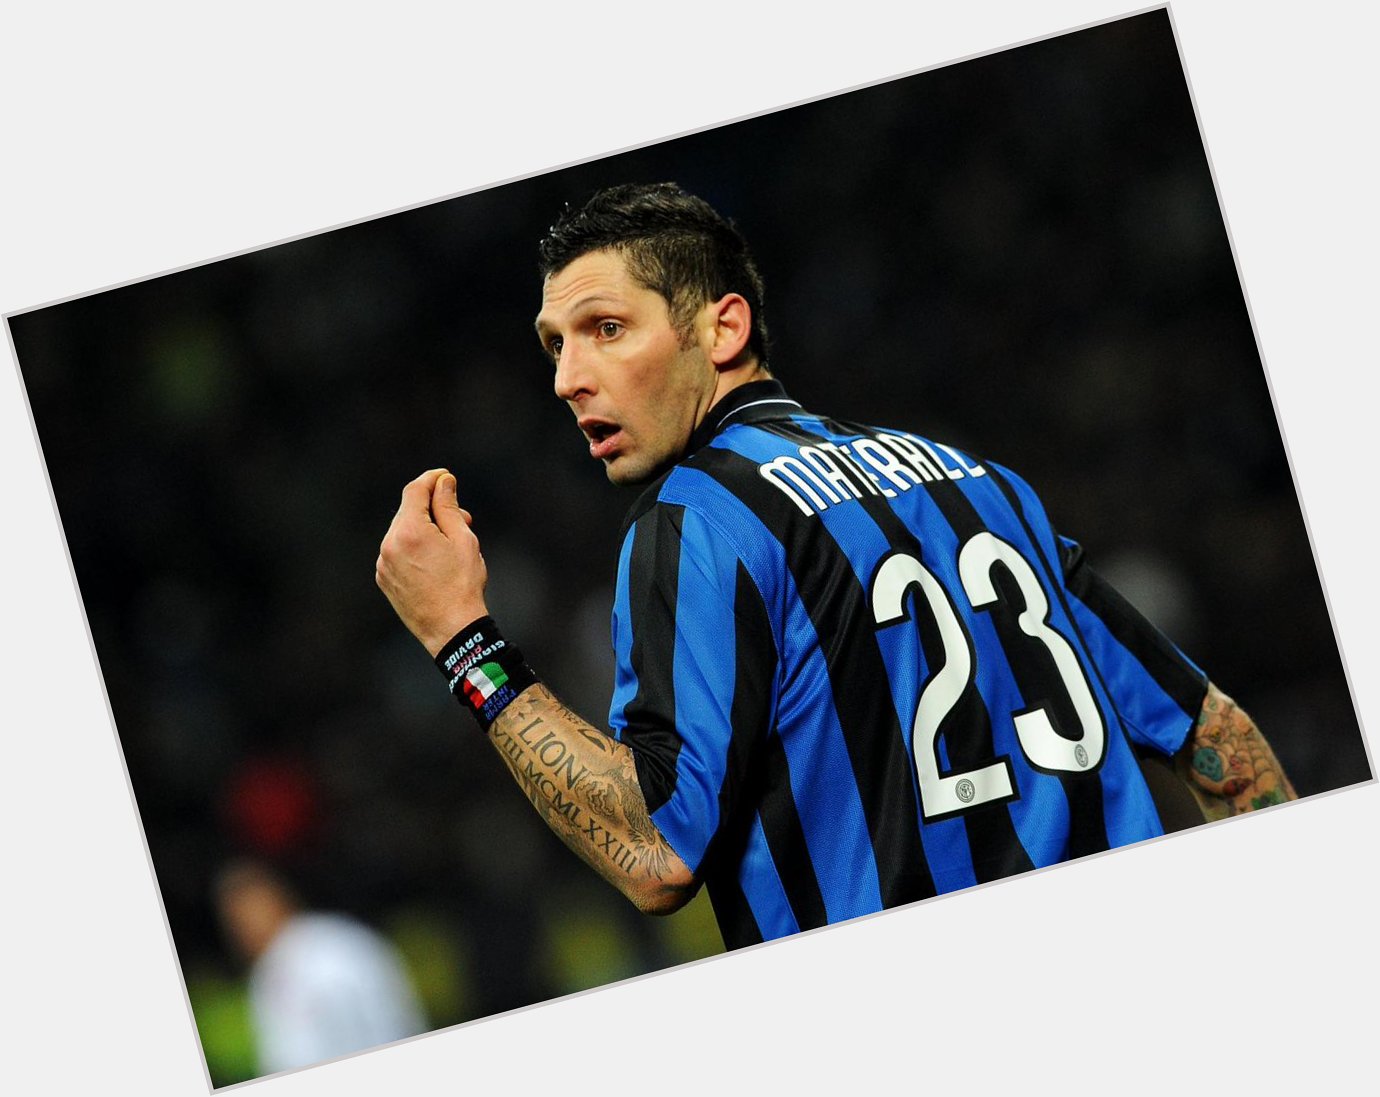 Buon compleanno / Happy birthday to one of my all time favourite players, Marco Materazzi! 